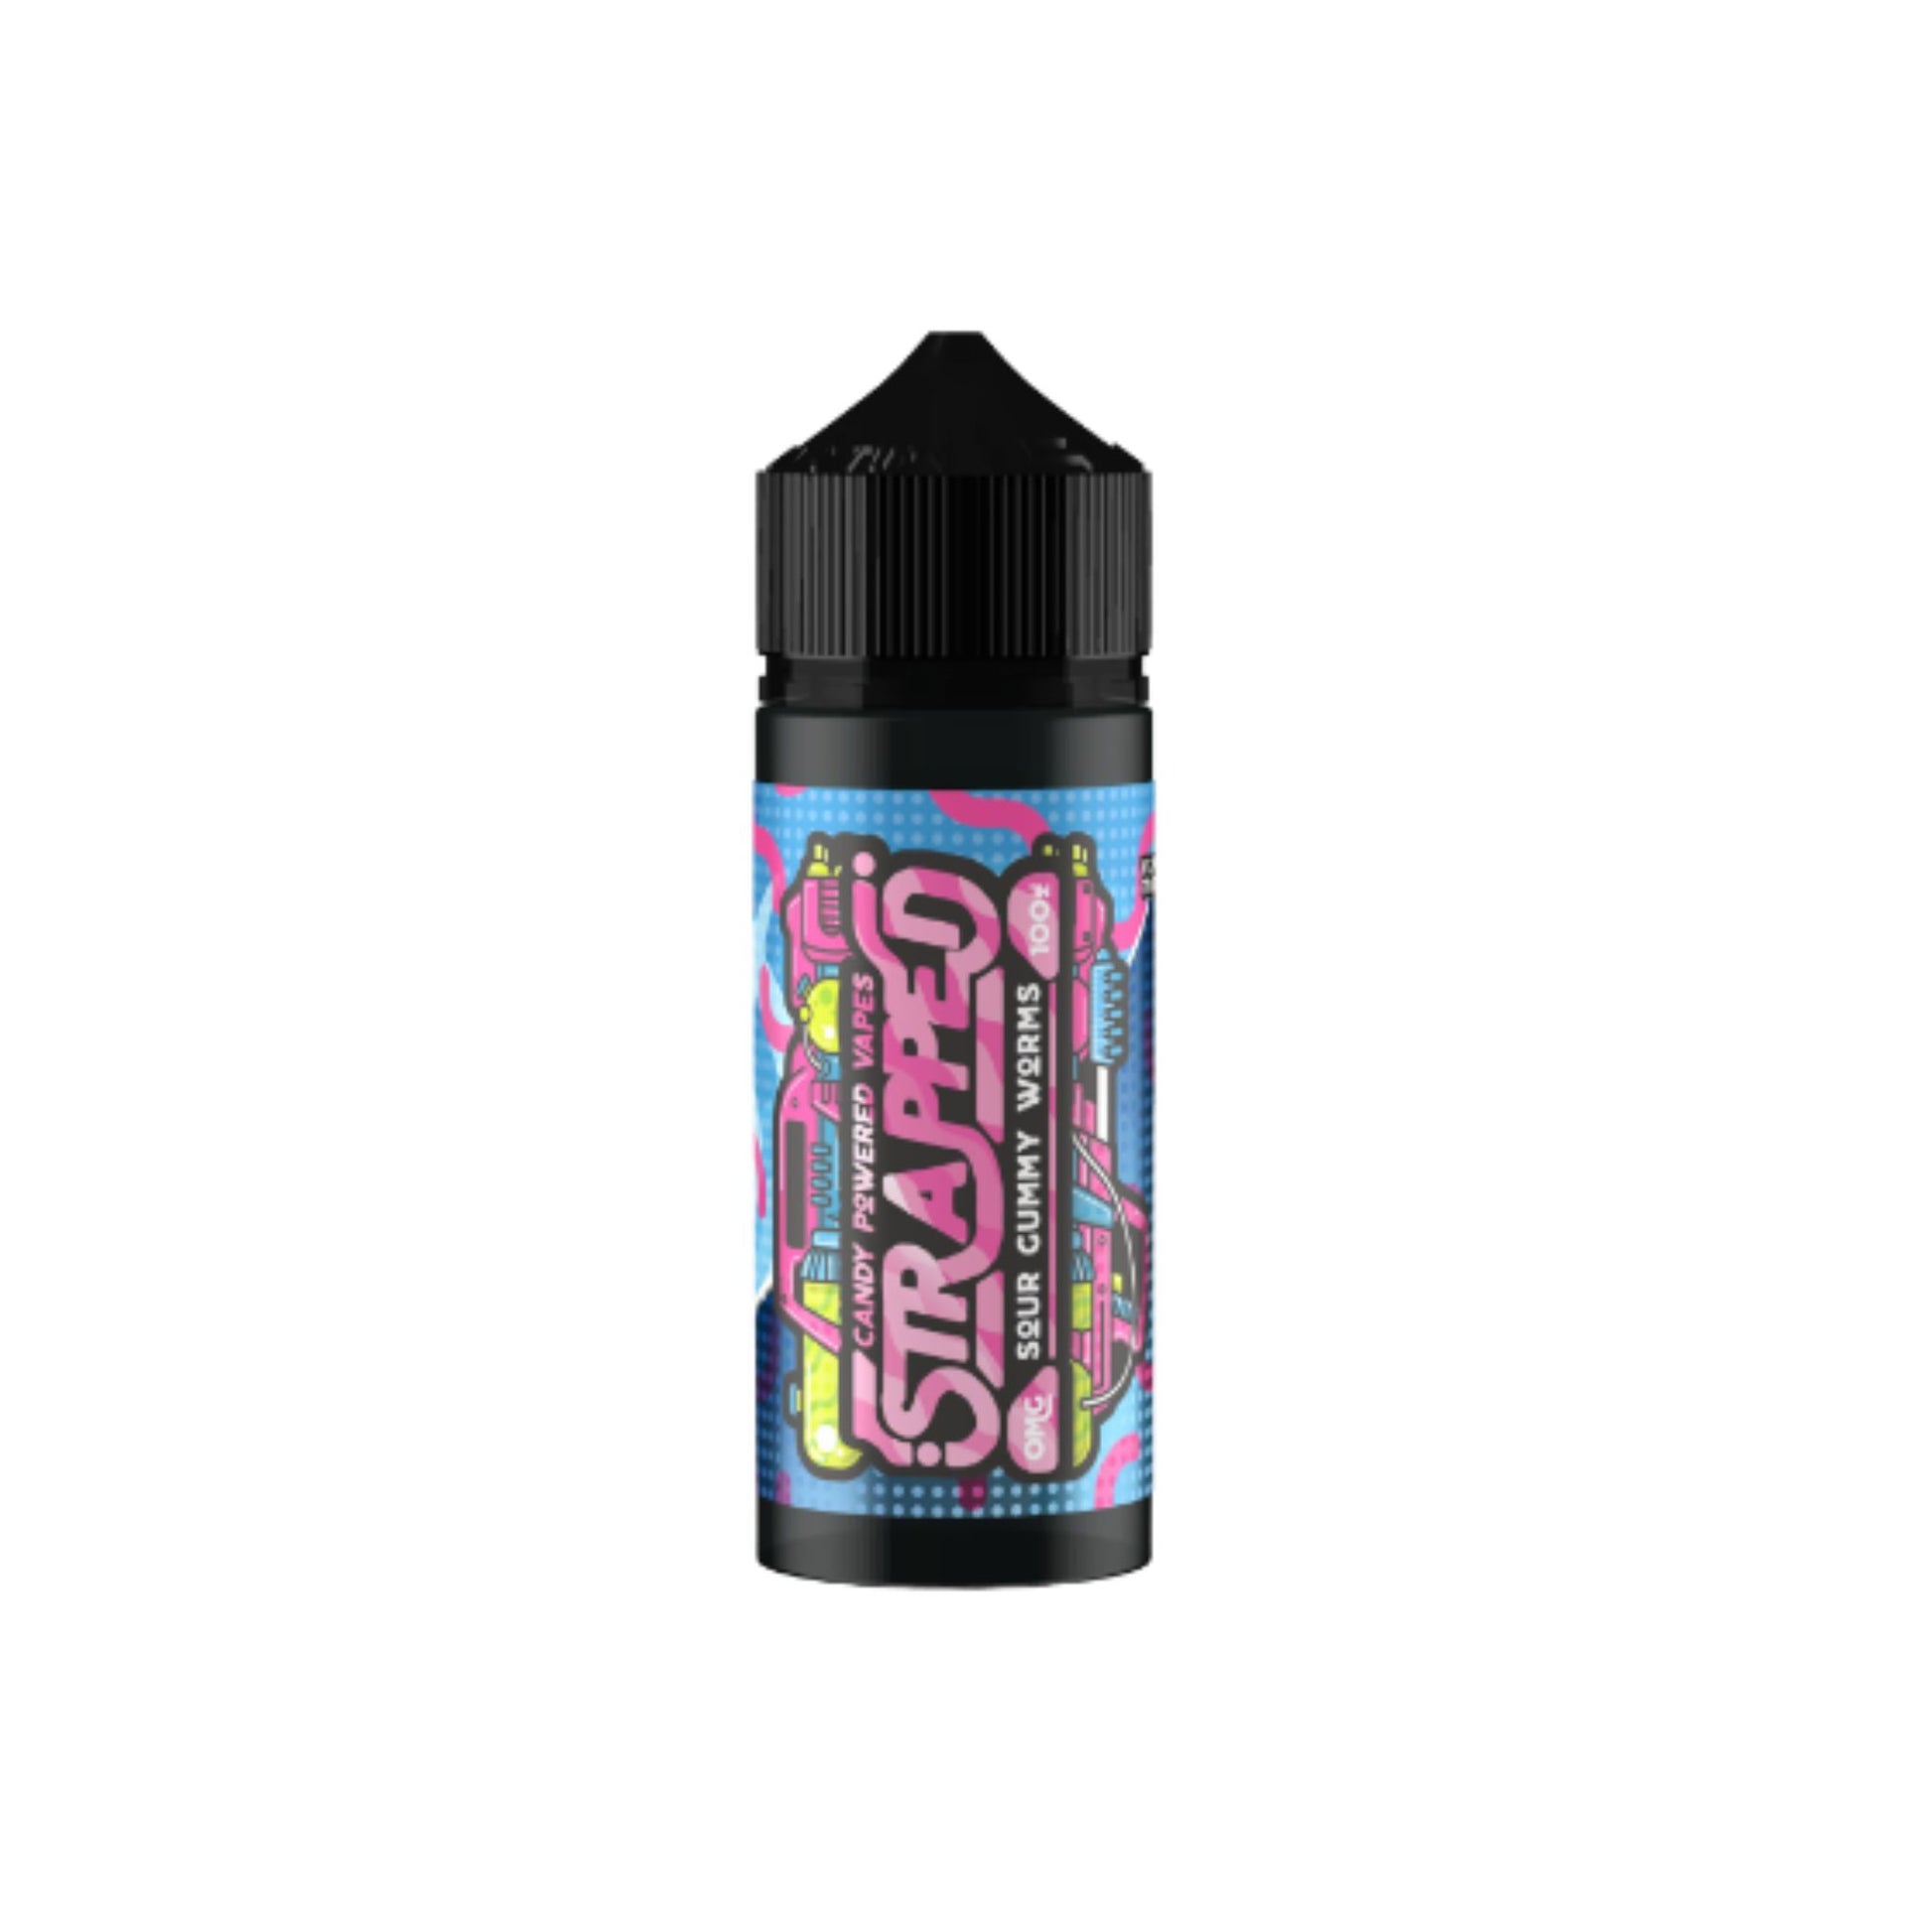 Strapped Original | Sour Gummy Worms | 100ml bottle